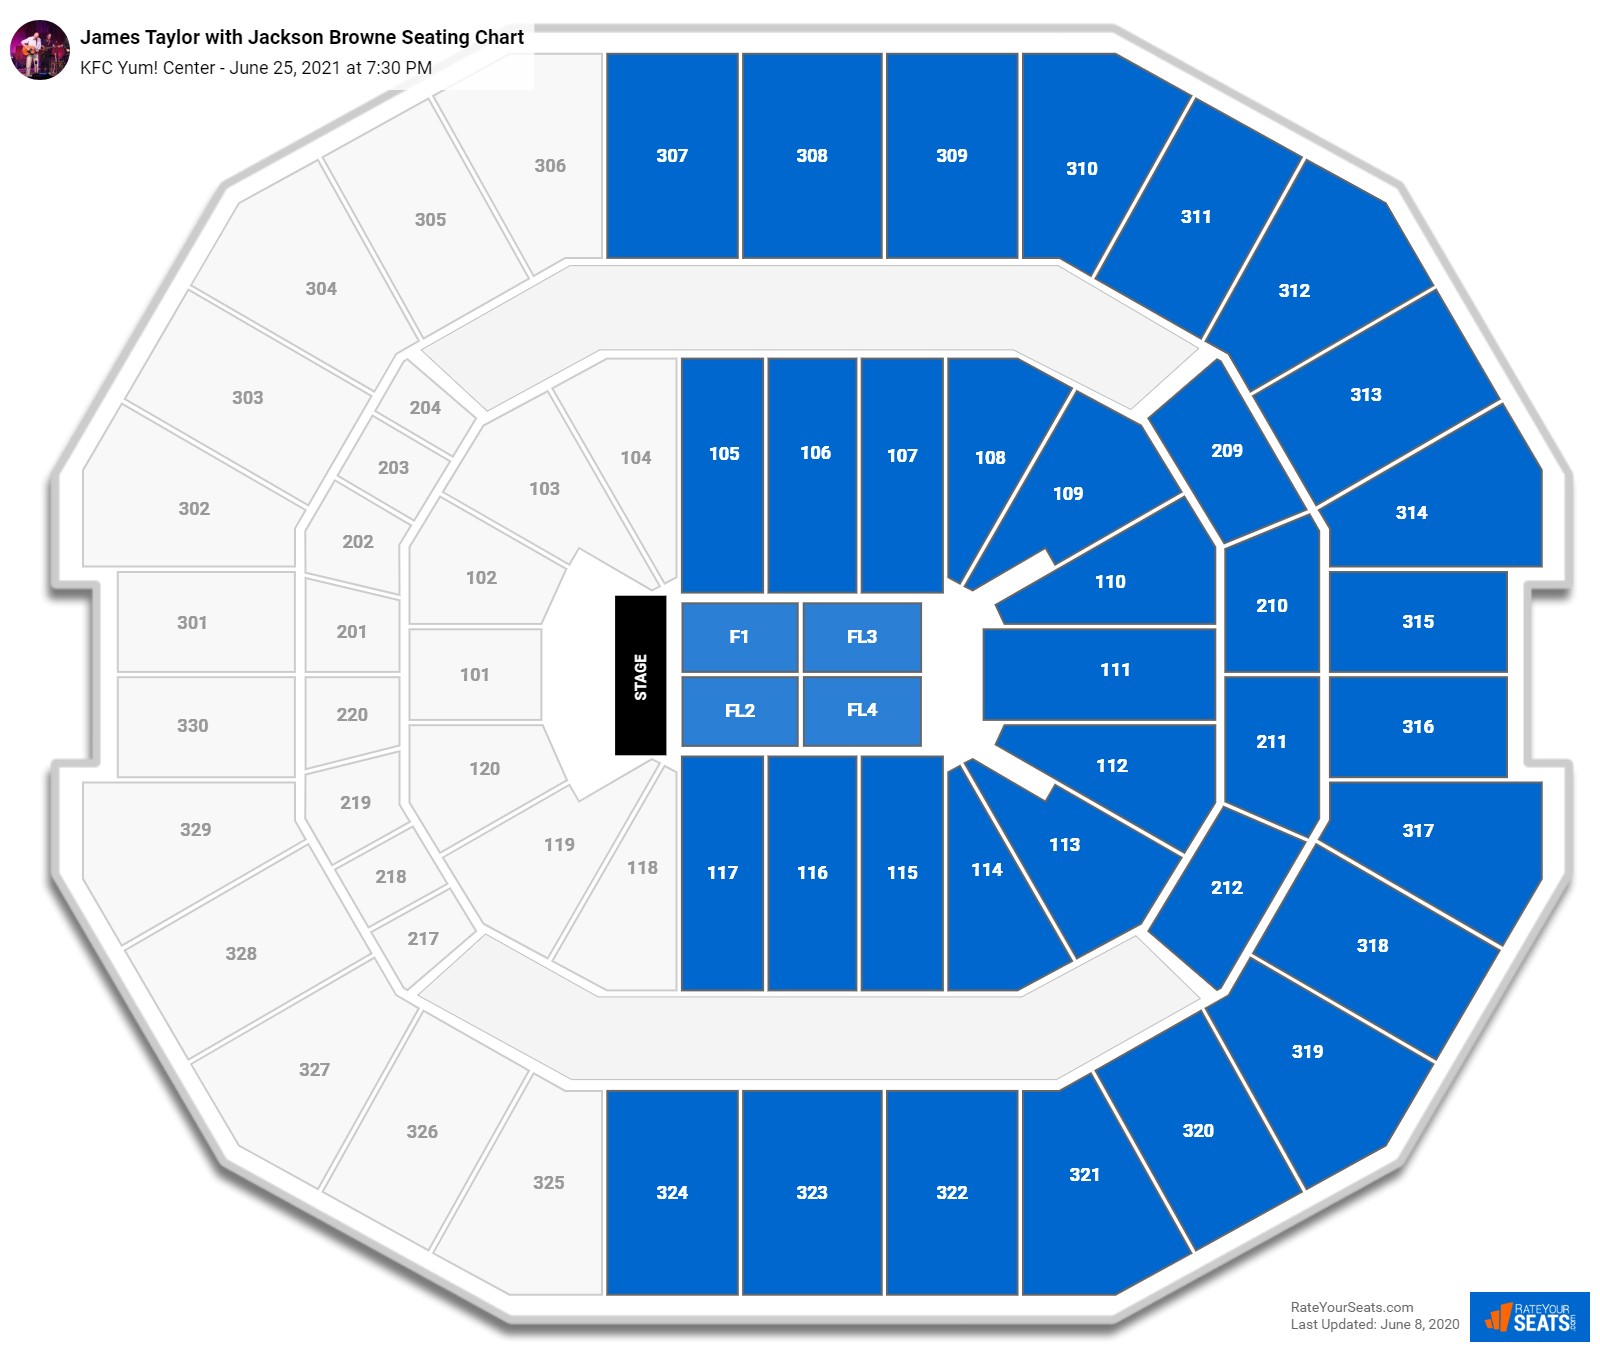 KFC Yum! Center Seating Charts for Concerts